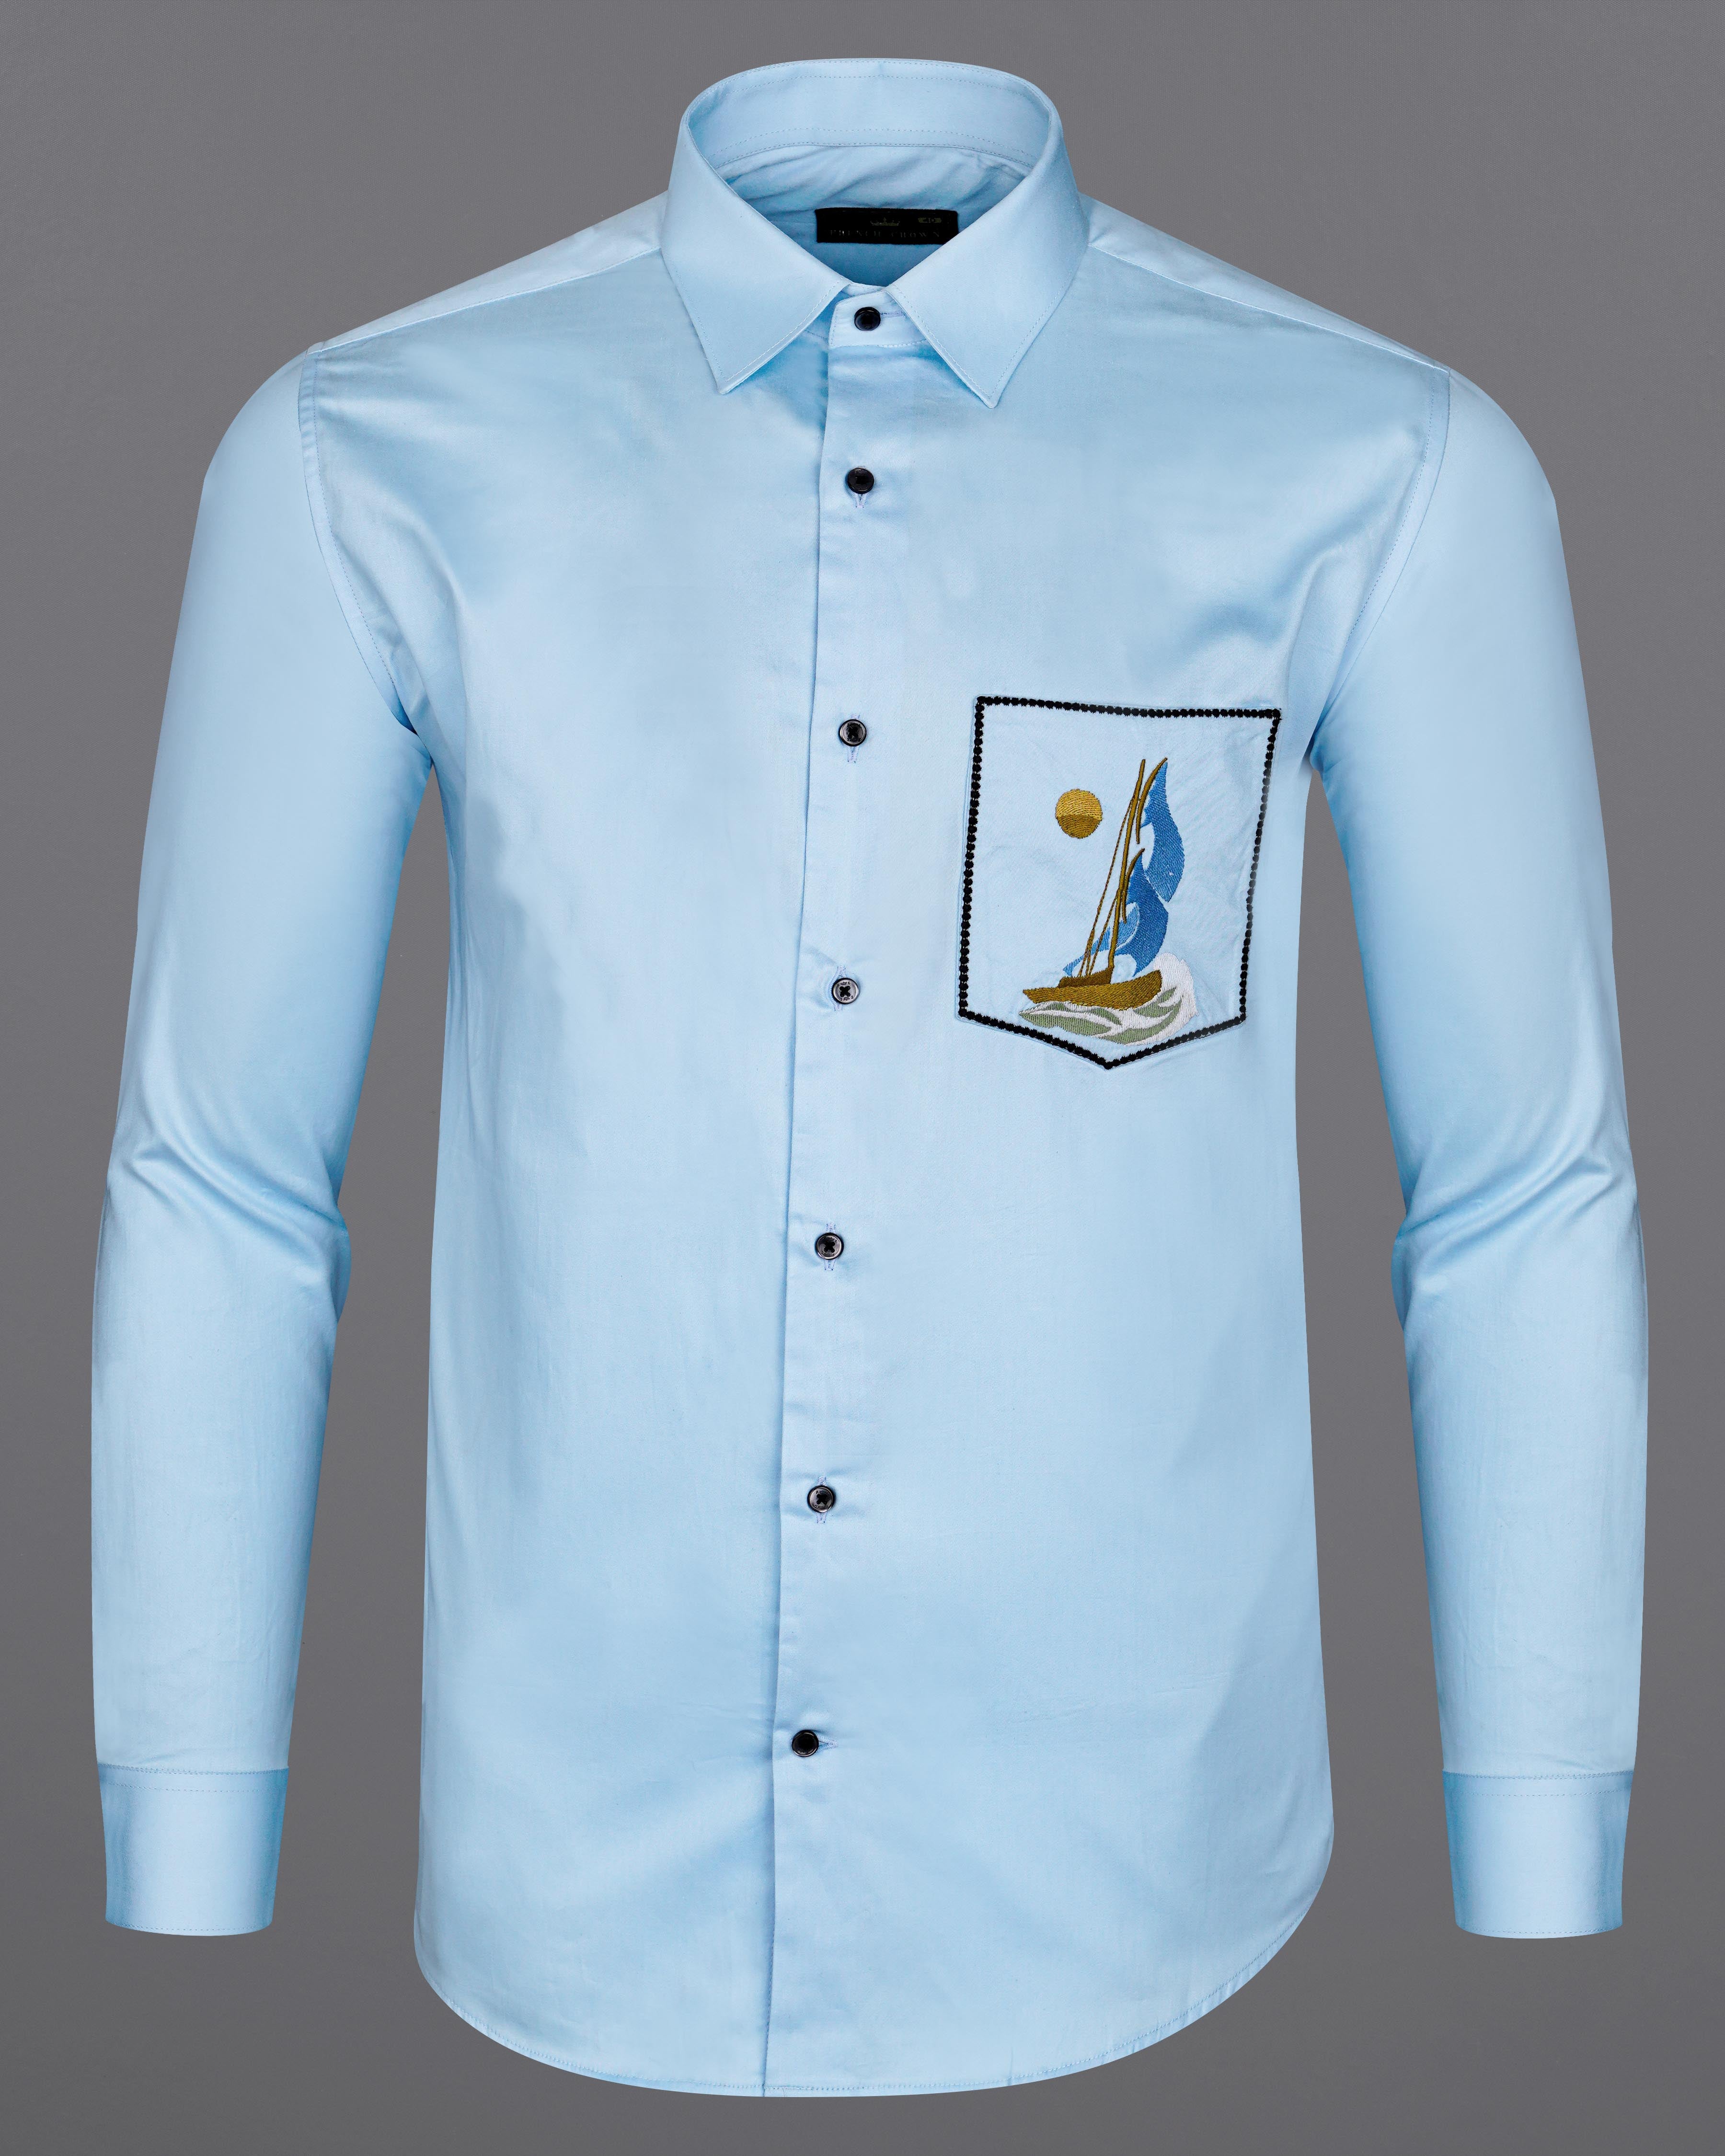 Tropical Aqua Blue with Boat Embroidered Super Soft Premium Cotton Shirt 8437-E004-38, 8437-E004-H-38, 8437-E004-39, 8437-E004-H-39, 8437-E004-40, 8437-E004-H-40, 8437-E004-42, 8437-E004-H-42, 8437-E004-44, 8437-E004-H-44, 8437-E004-46, 8437-E004-H-46, 8437-E004-48, 8437-E004-H-48, 8437-E004-50, 8437-E004-H-50, 8437-E004-52, 8437-E004-H-52